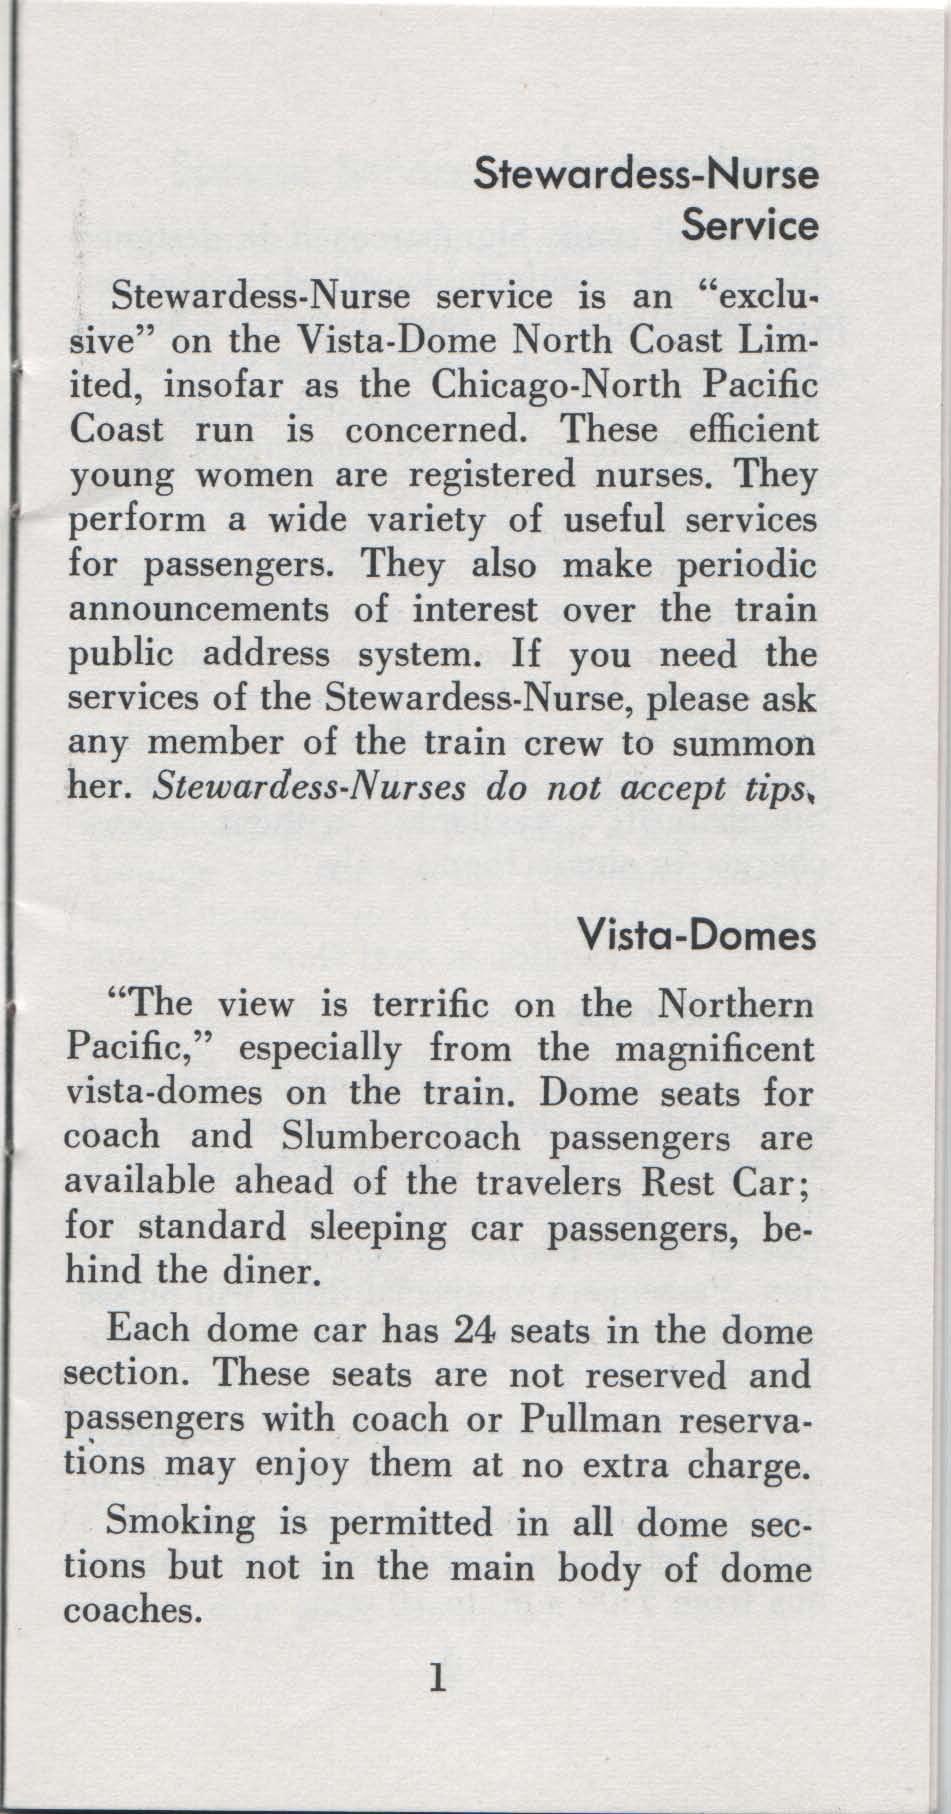 Stewardess-Nurse Service Stewardess-Nurse service is an "exclusive" on the Vista-Dome North Coast Limited, insofar as the Chicago-North Pacific Coast run is concerned.